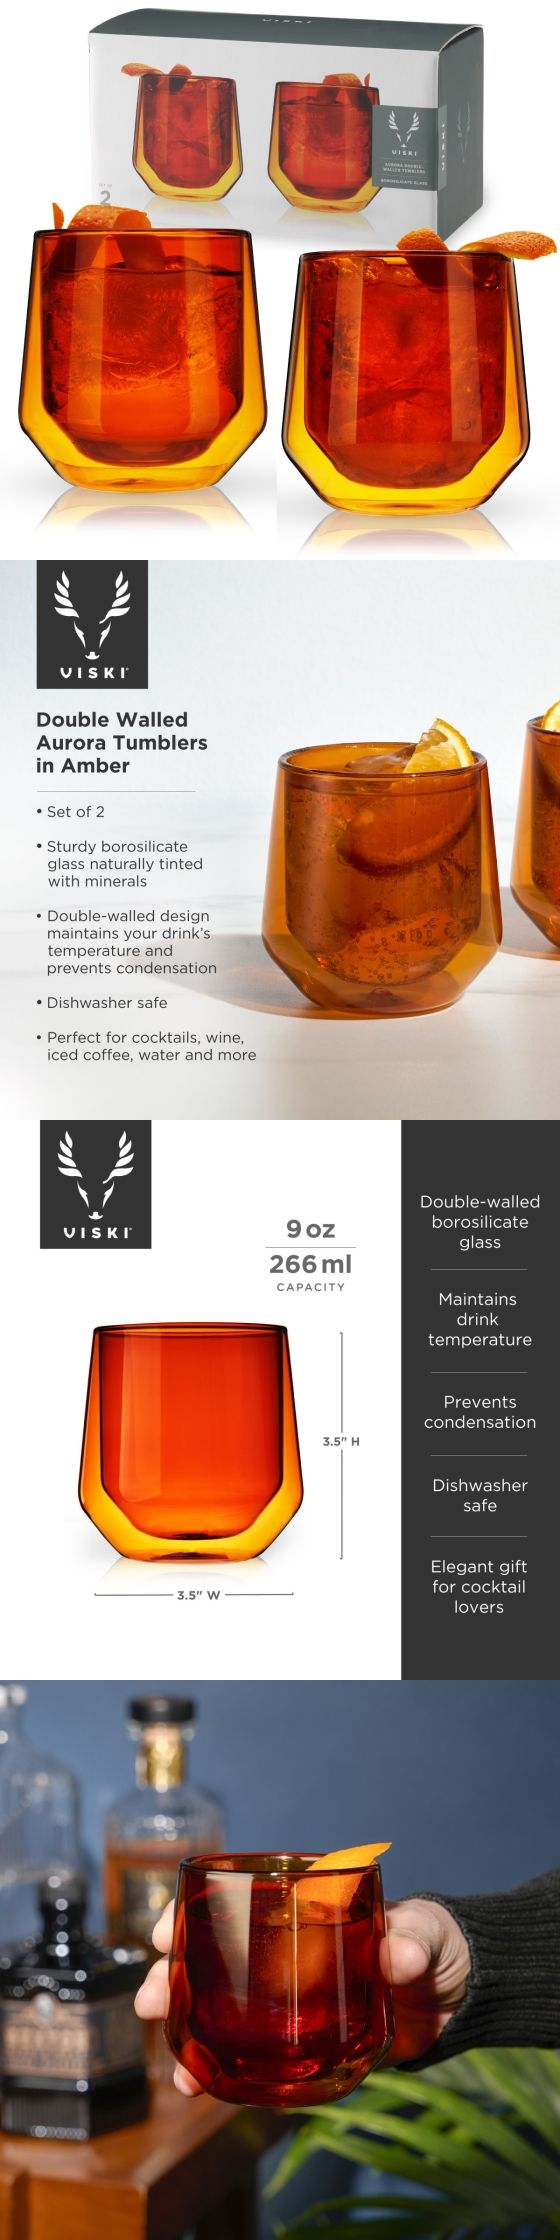 Double-Walled Aurora Tumblers in Amber Glass by VISKI (Set of 2)